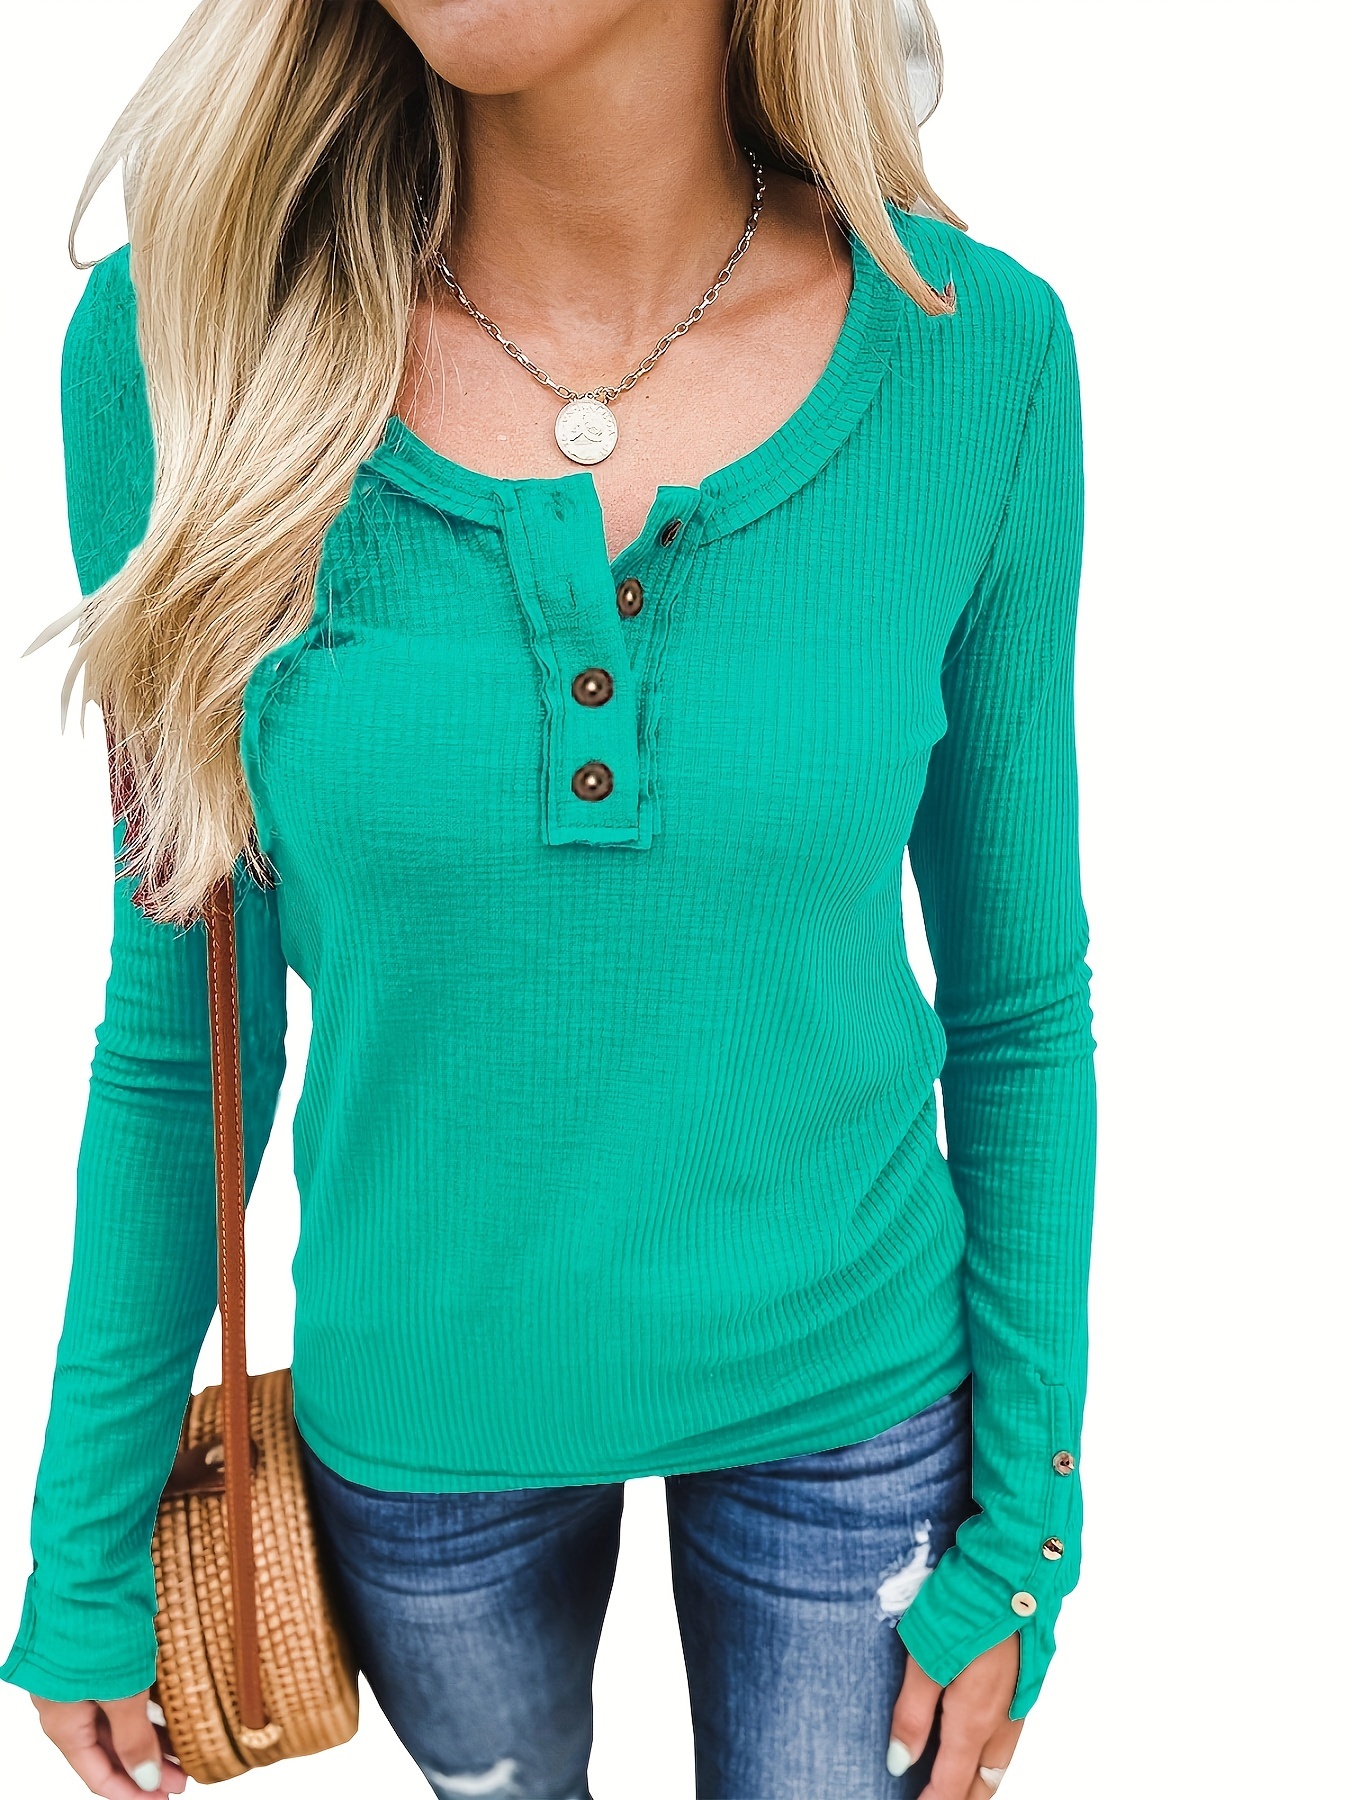 TQWQT Womens Long Sleeve Henley Tops Casual Button Up Tunic Blouse